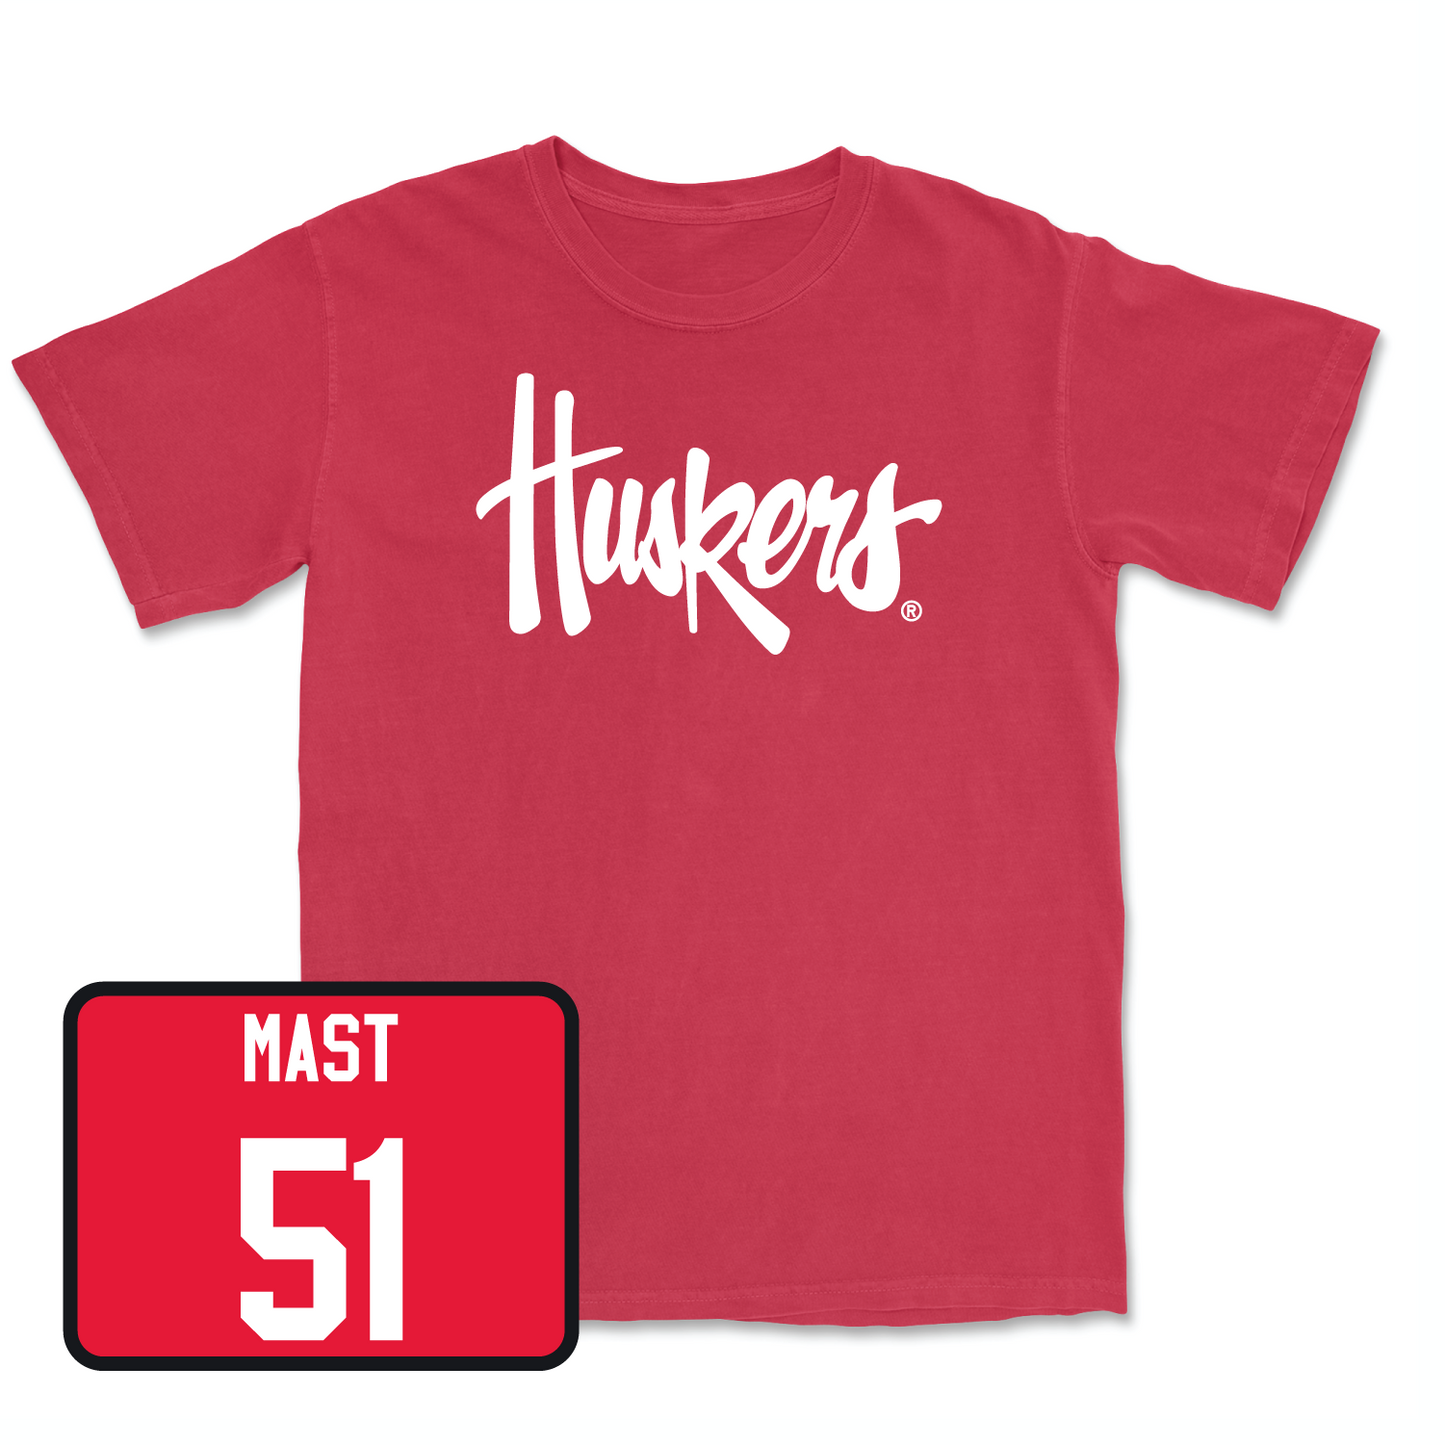 Red Men's Basketball Huskers Tee Youth Large / Rienk Mast | #51